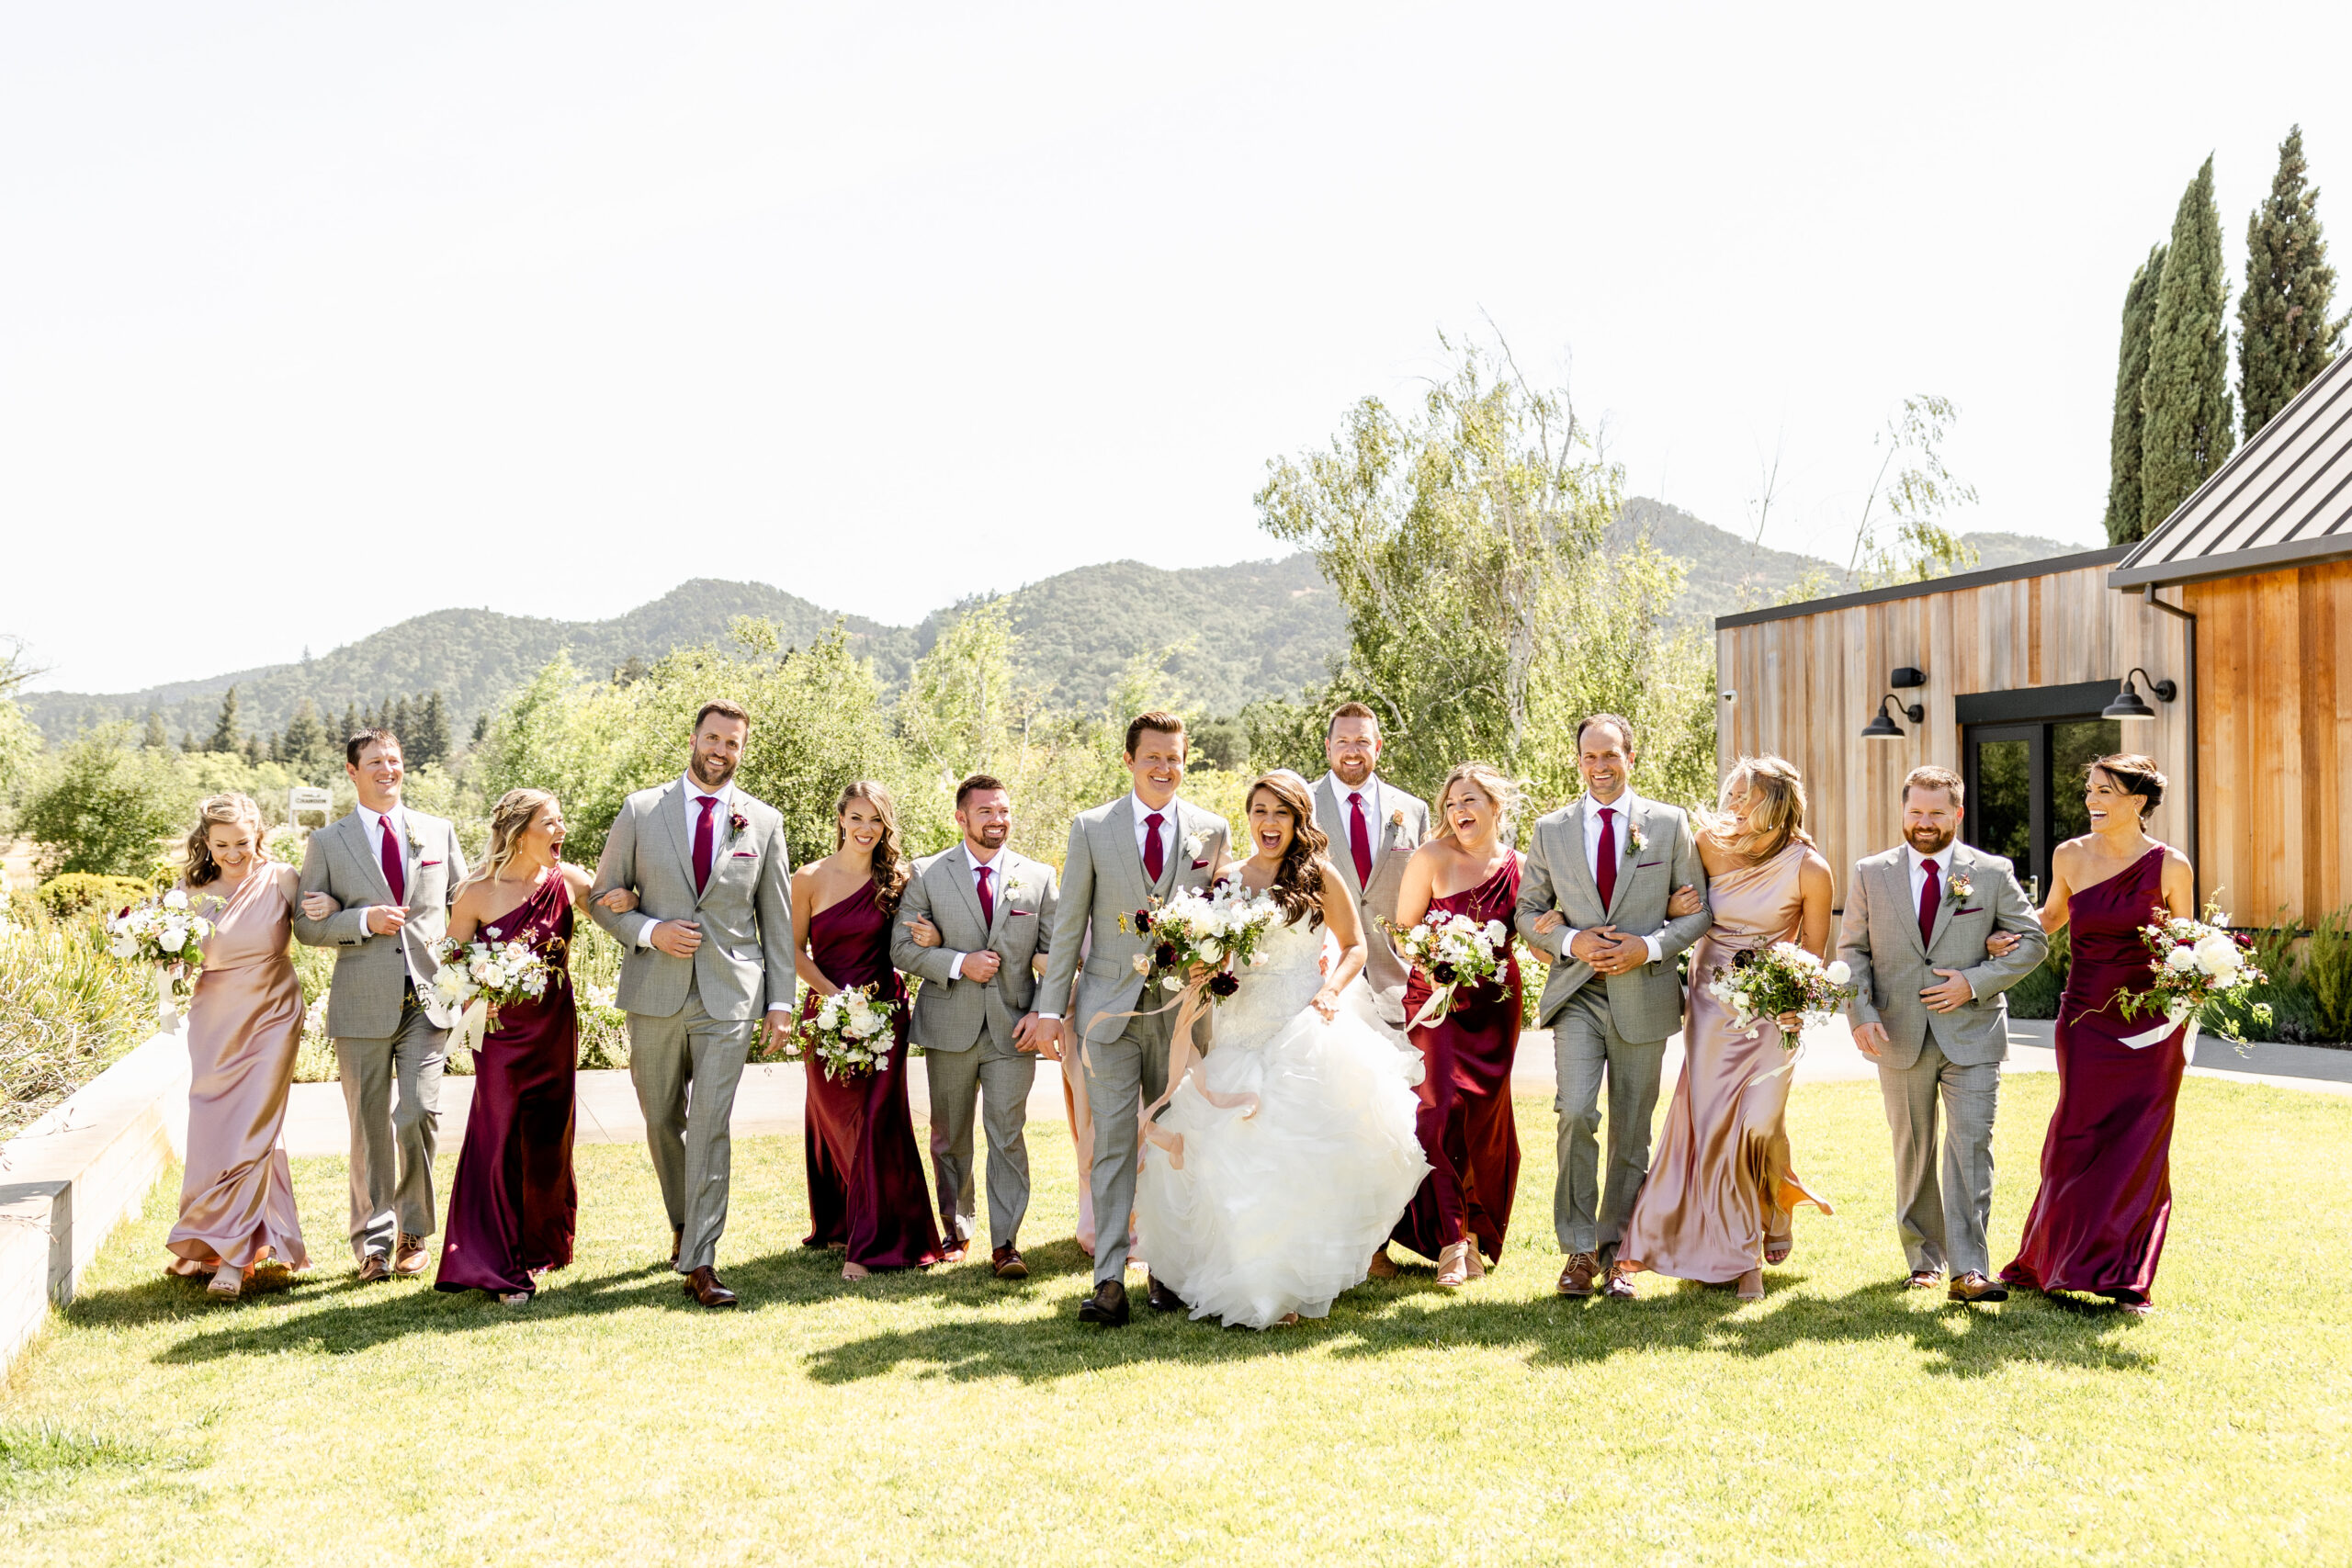 What Happens When a Wedding Party Member Drops Out Last-Minute?